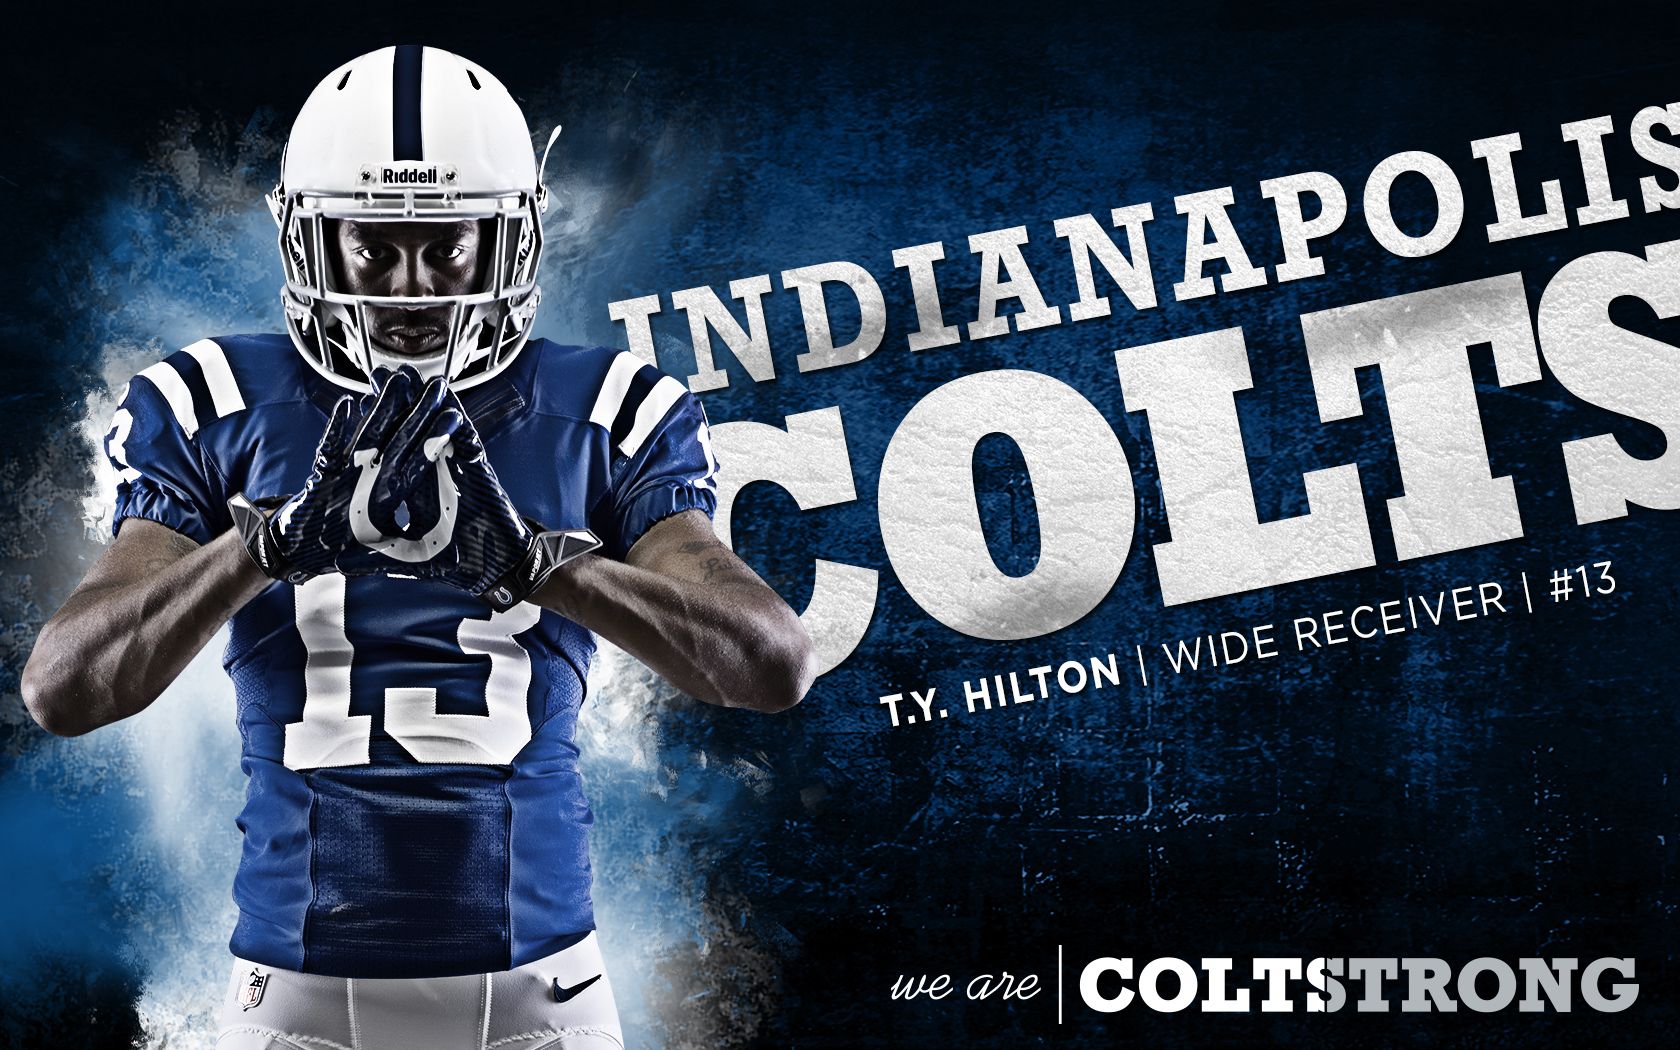 RDV16: Colts Wallpaper in Best Resolutions, High Quality